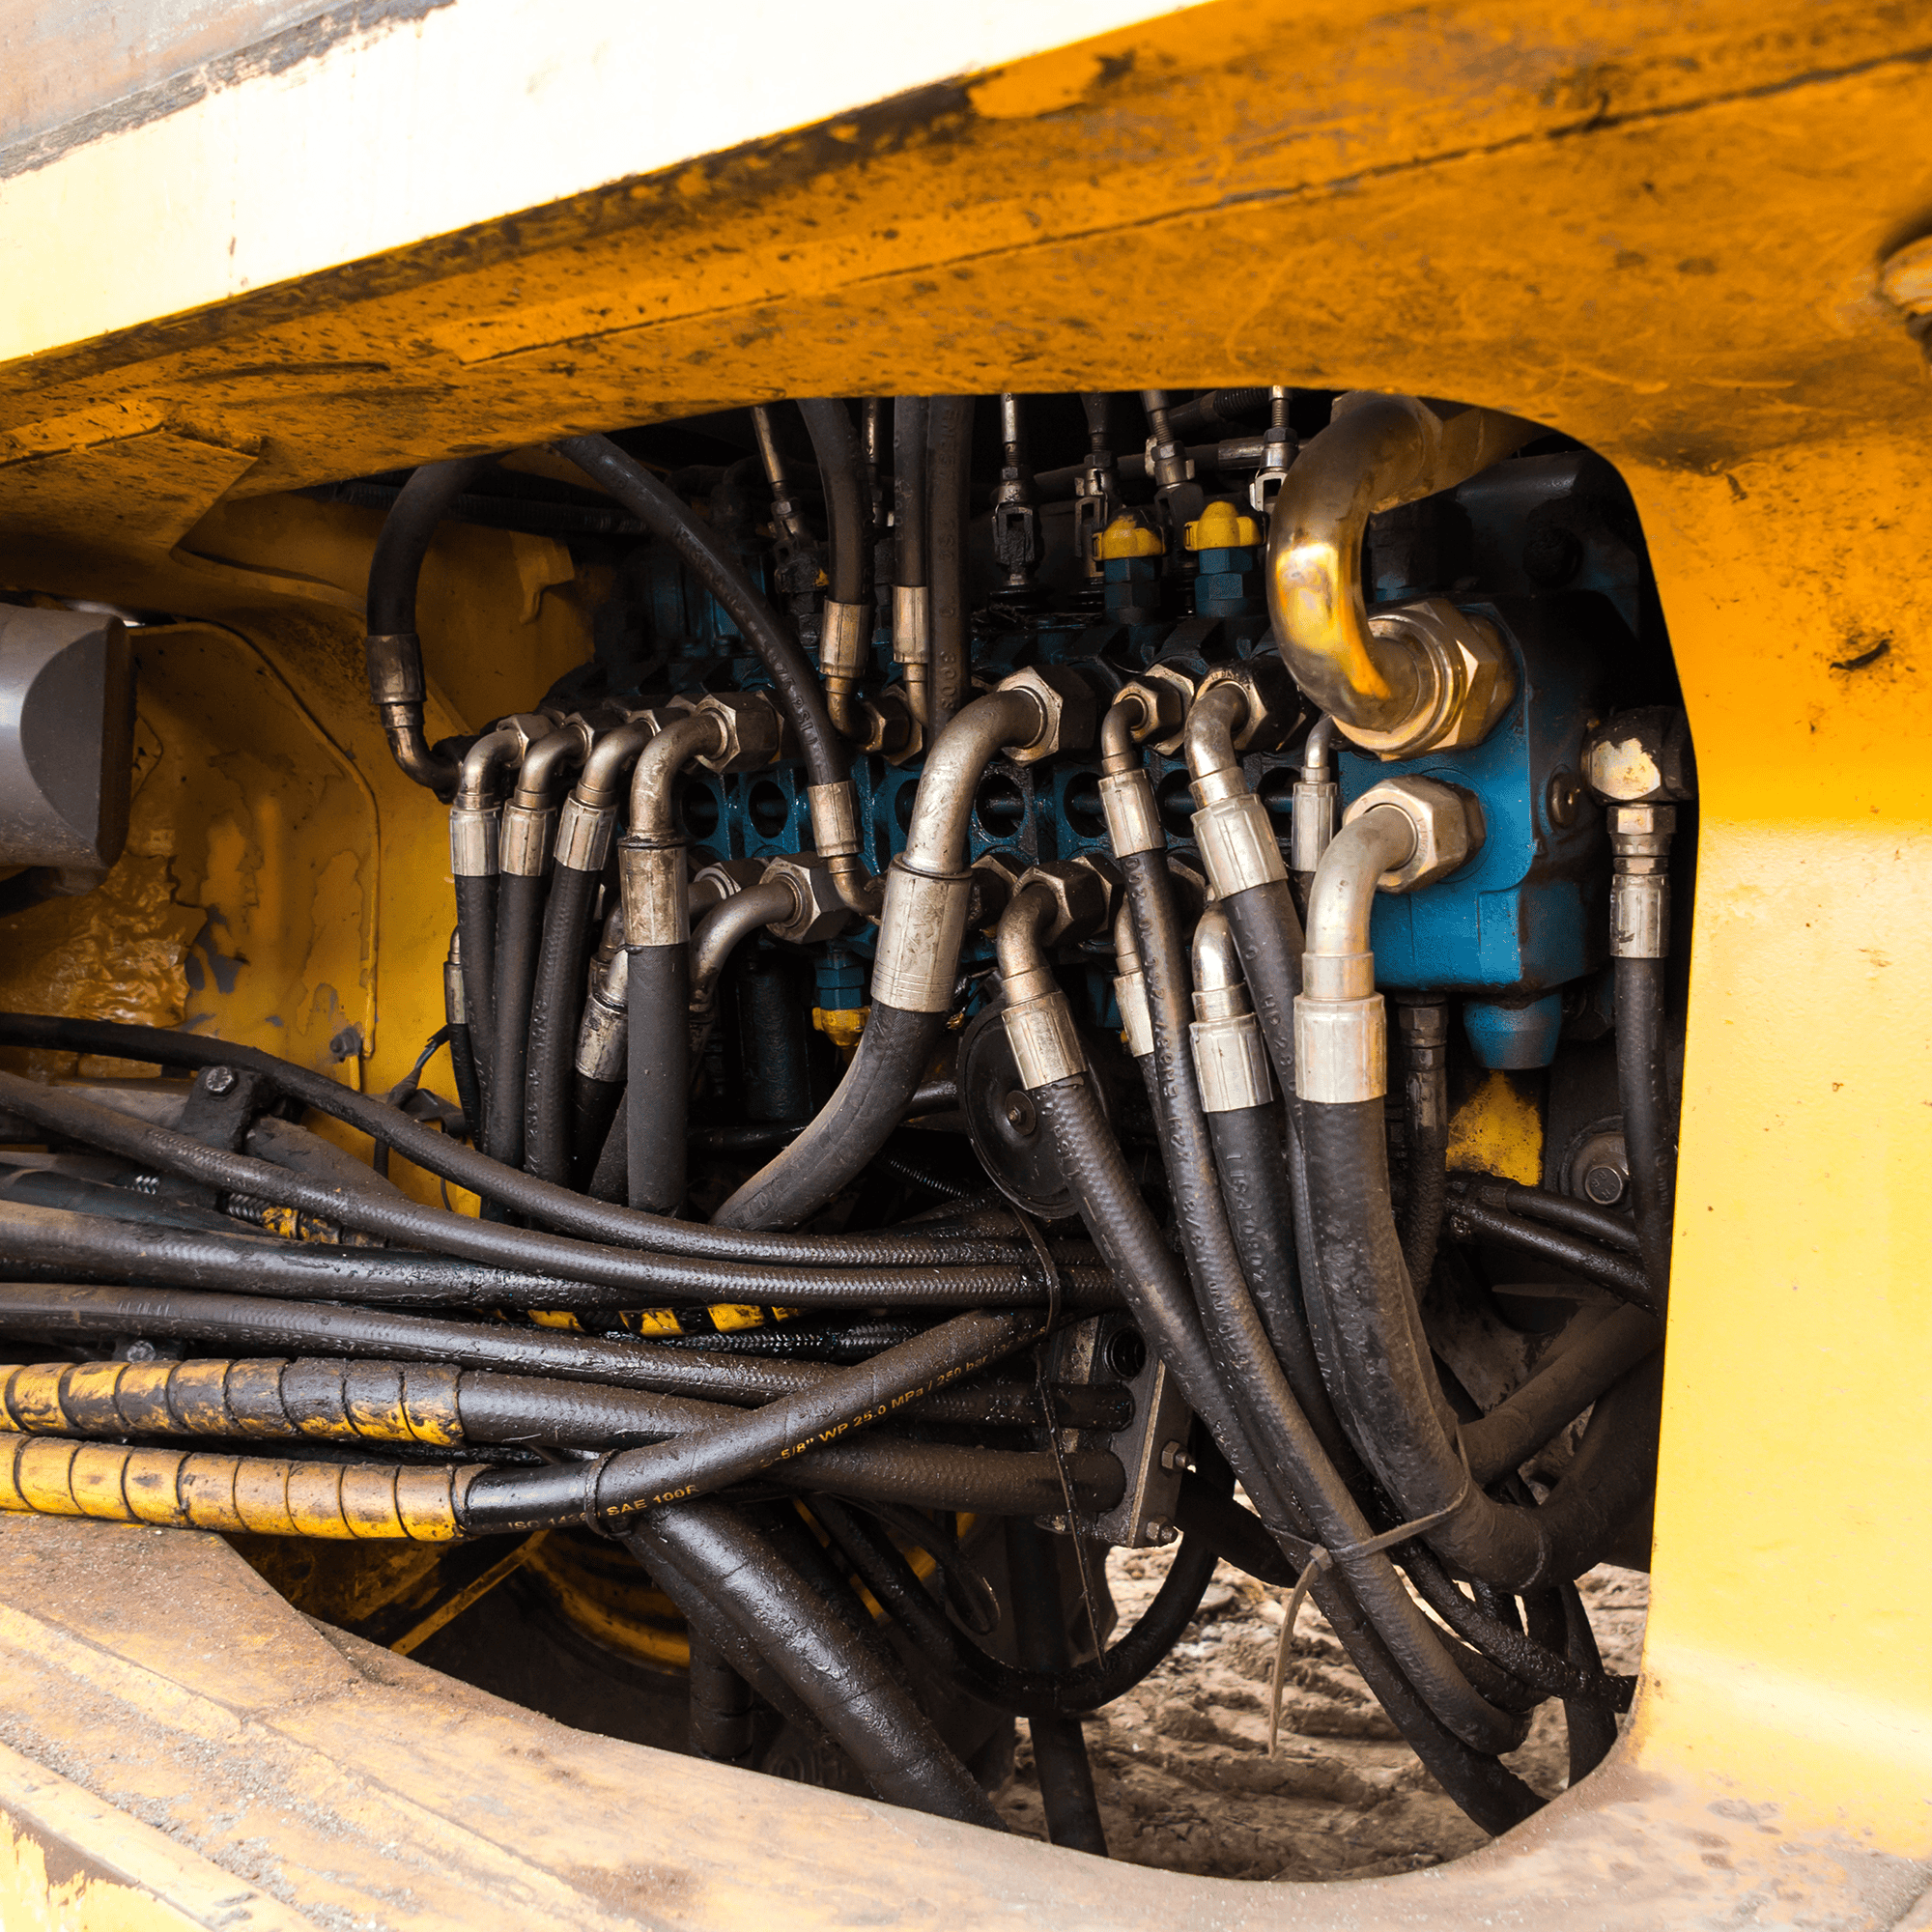 A shot of the engine compartment of an excavator